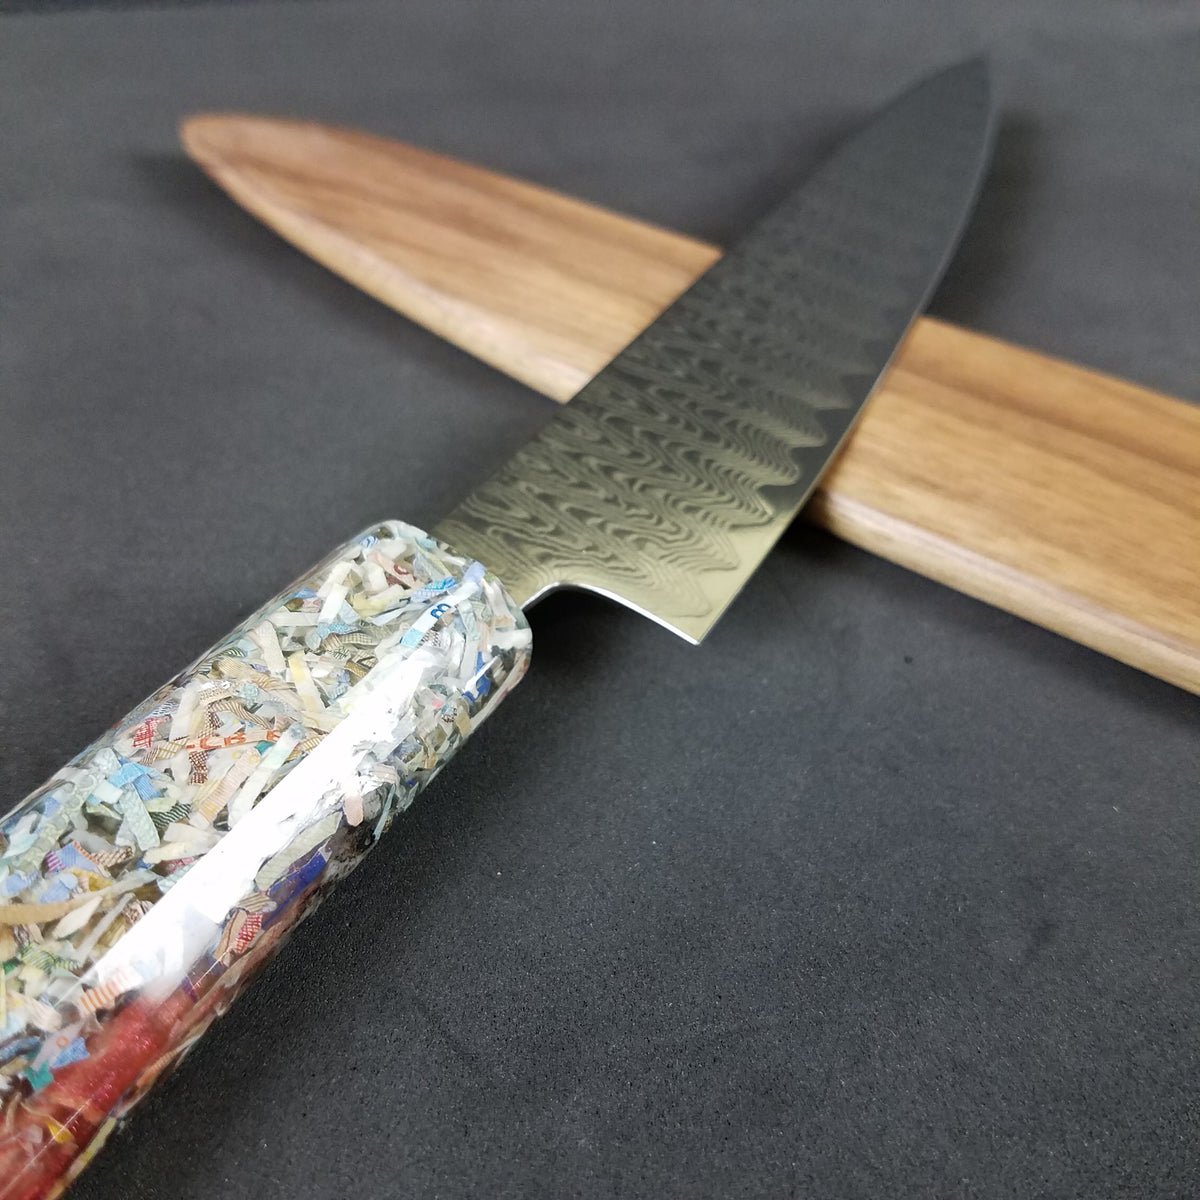 Forex Fiasco - 6in (150mm) Damascus Petty Culinary Knife